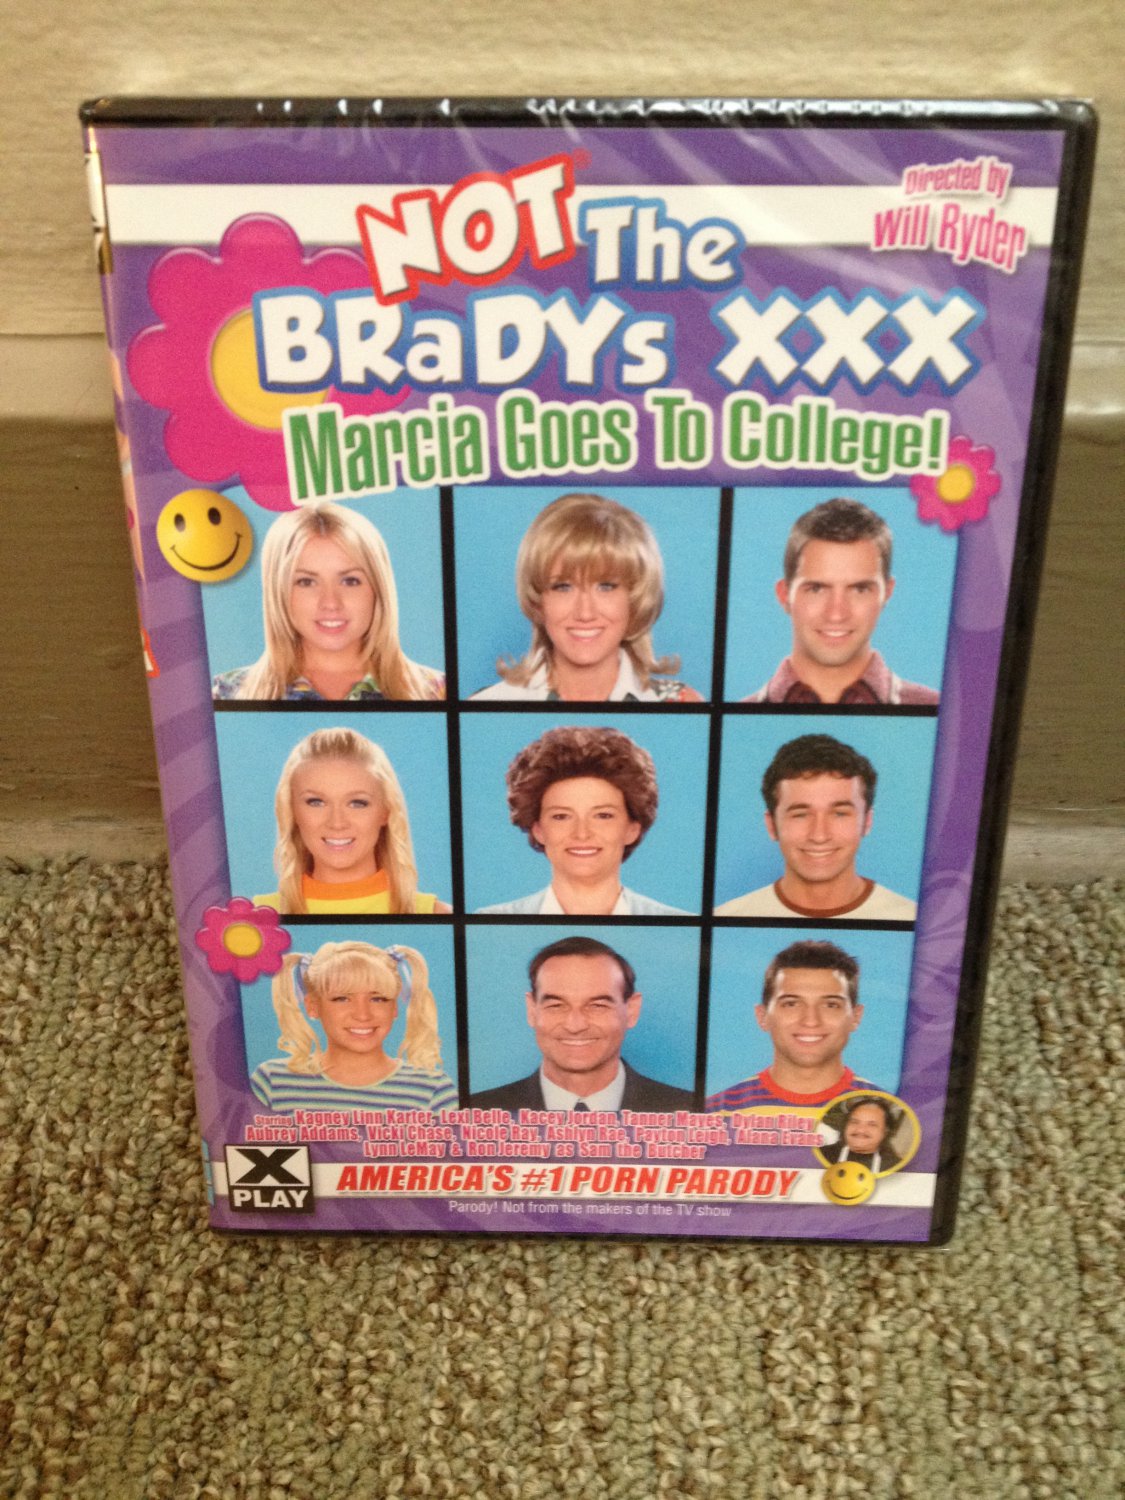 NOT THE BRADYS MARCIA GOES TO COLLEGE XXX ADULT DVD NEW NEVER OPENED SHRINK WRAPPED